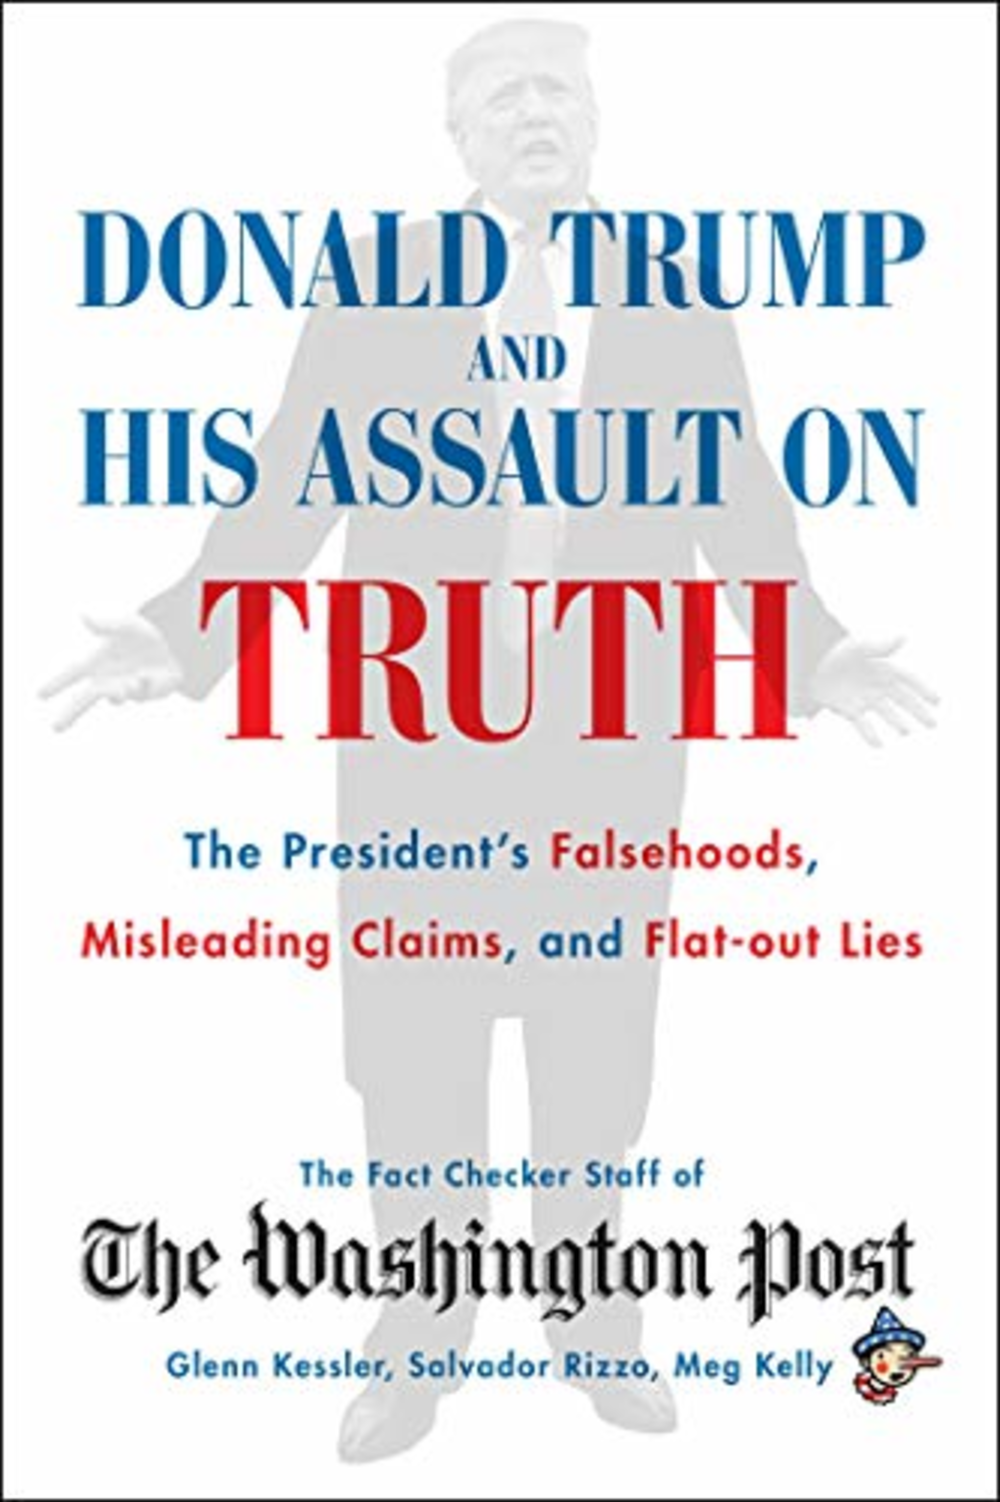 Donald Trump and His Assault on the Truth